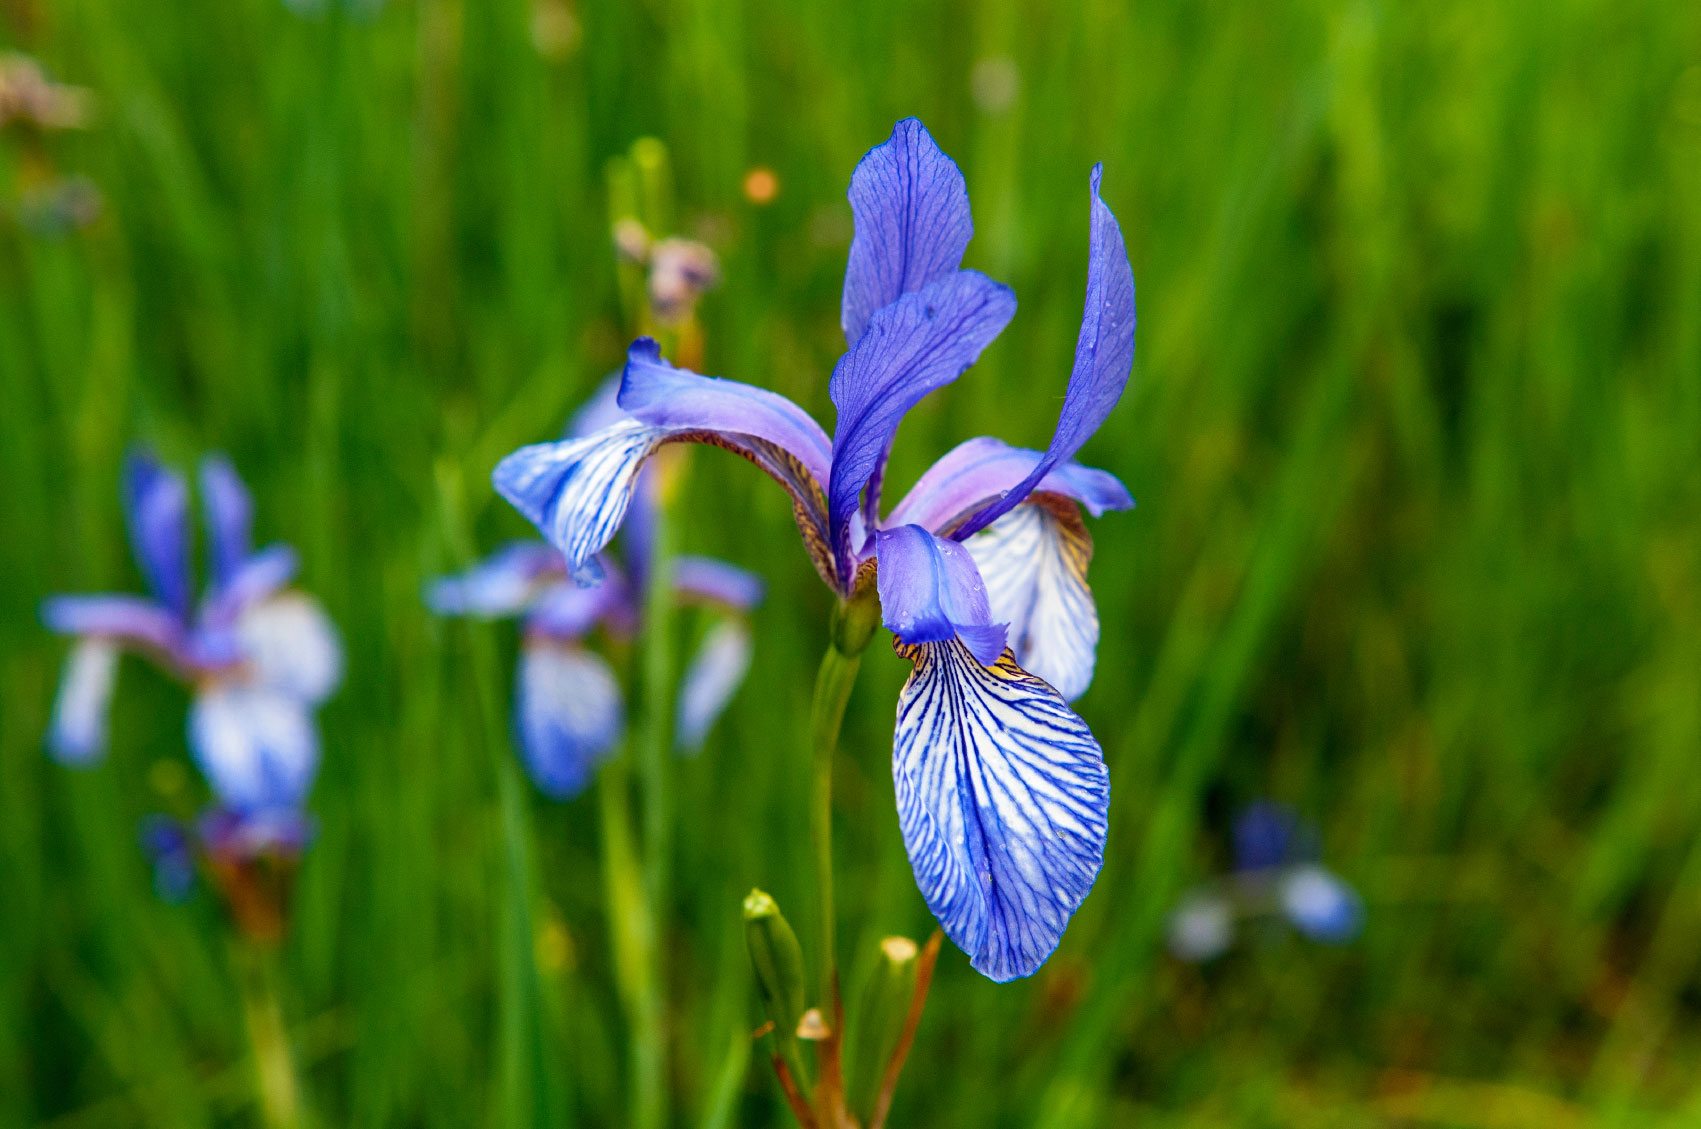 Planting Flag Iris - Learn About Growing Flag Iris Plants In The